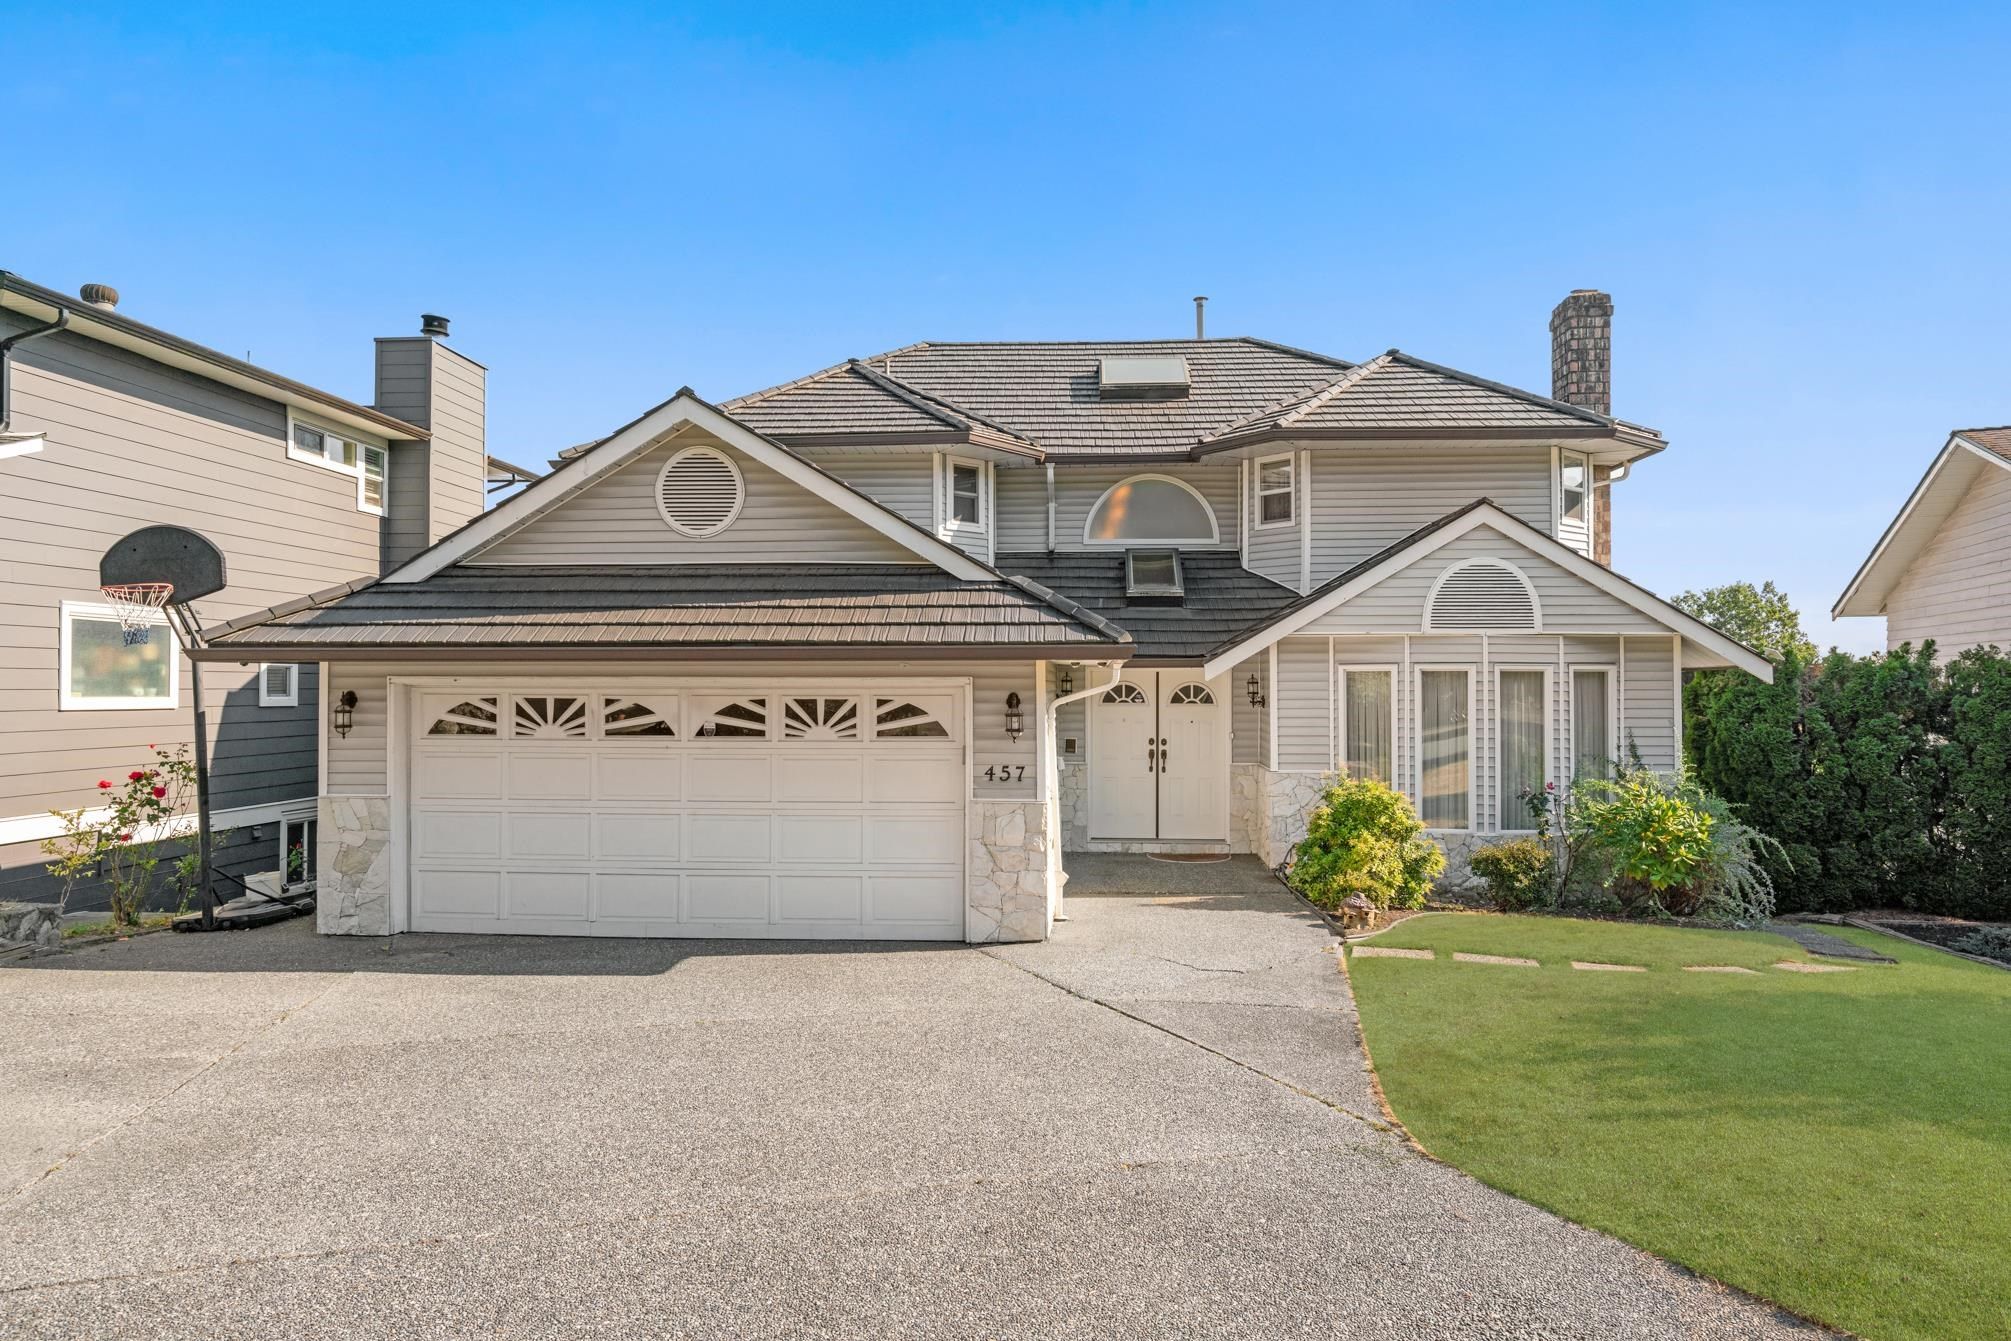 New property listed in Coquitlam East, Coquitlam